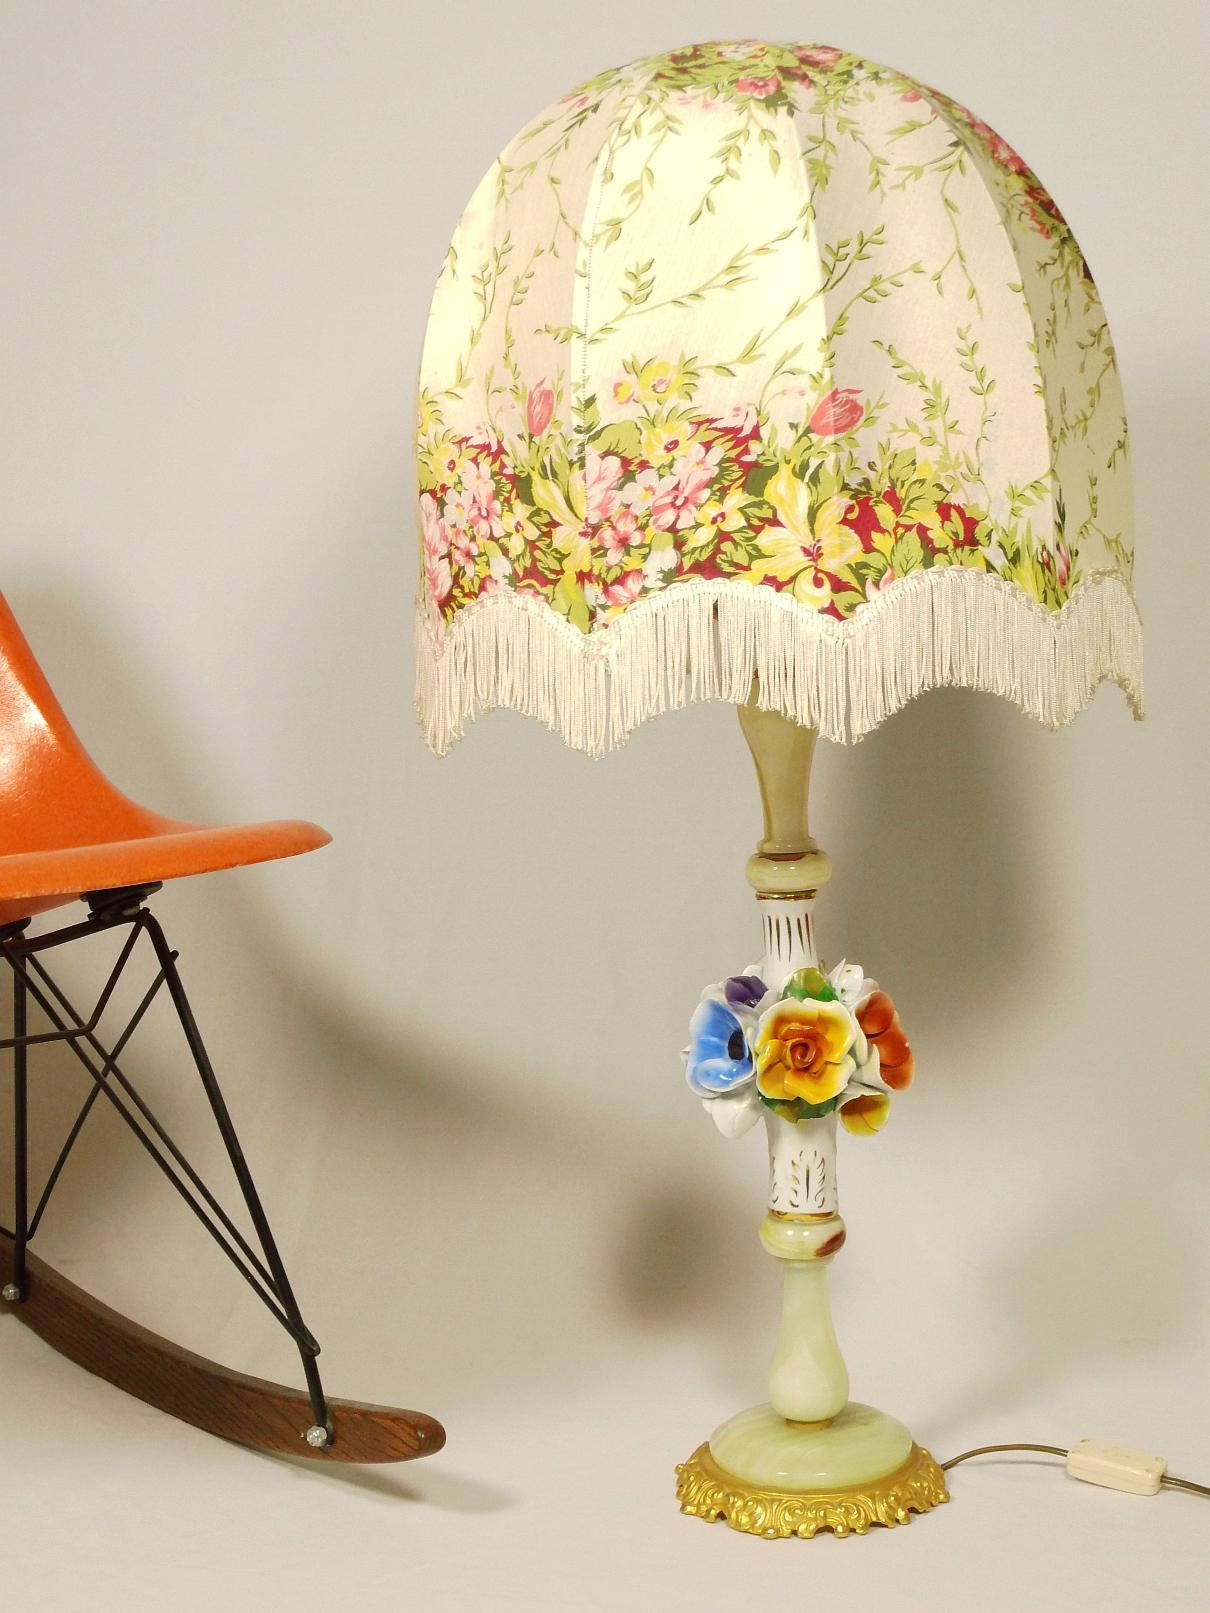 Onyx Exclusive large table lamp from the 1950s, porcelain, fringes